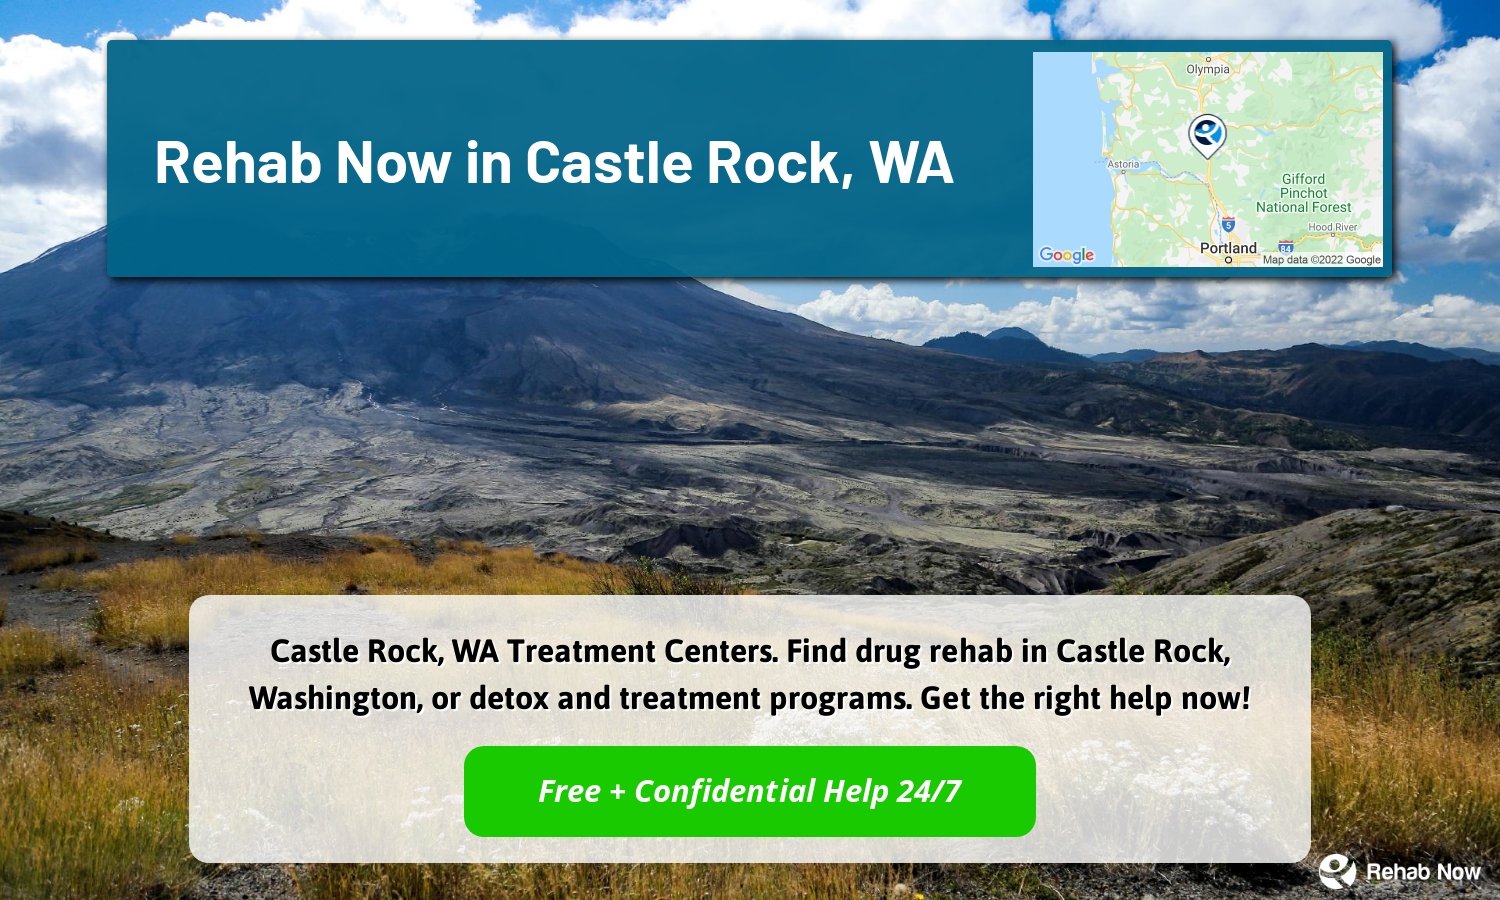 Castle Rock, WA Treatment Centers. Find drug rehab in Castle Rock, Washington, or detox and treatment programs. Get the right help now!